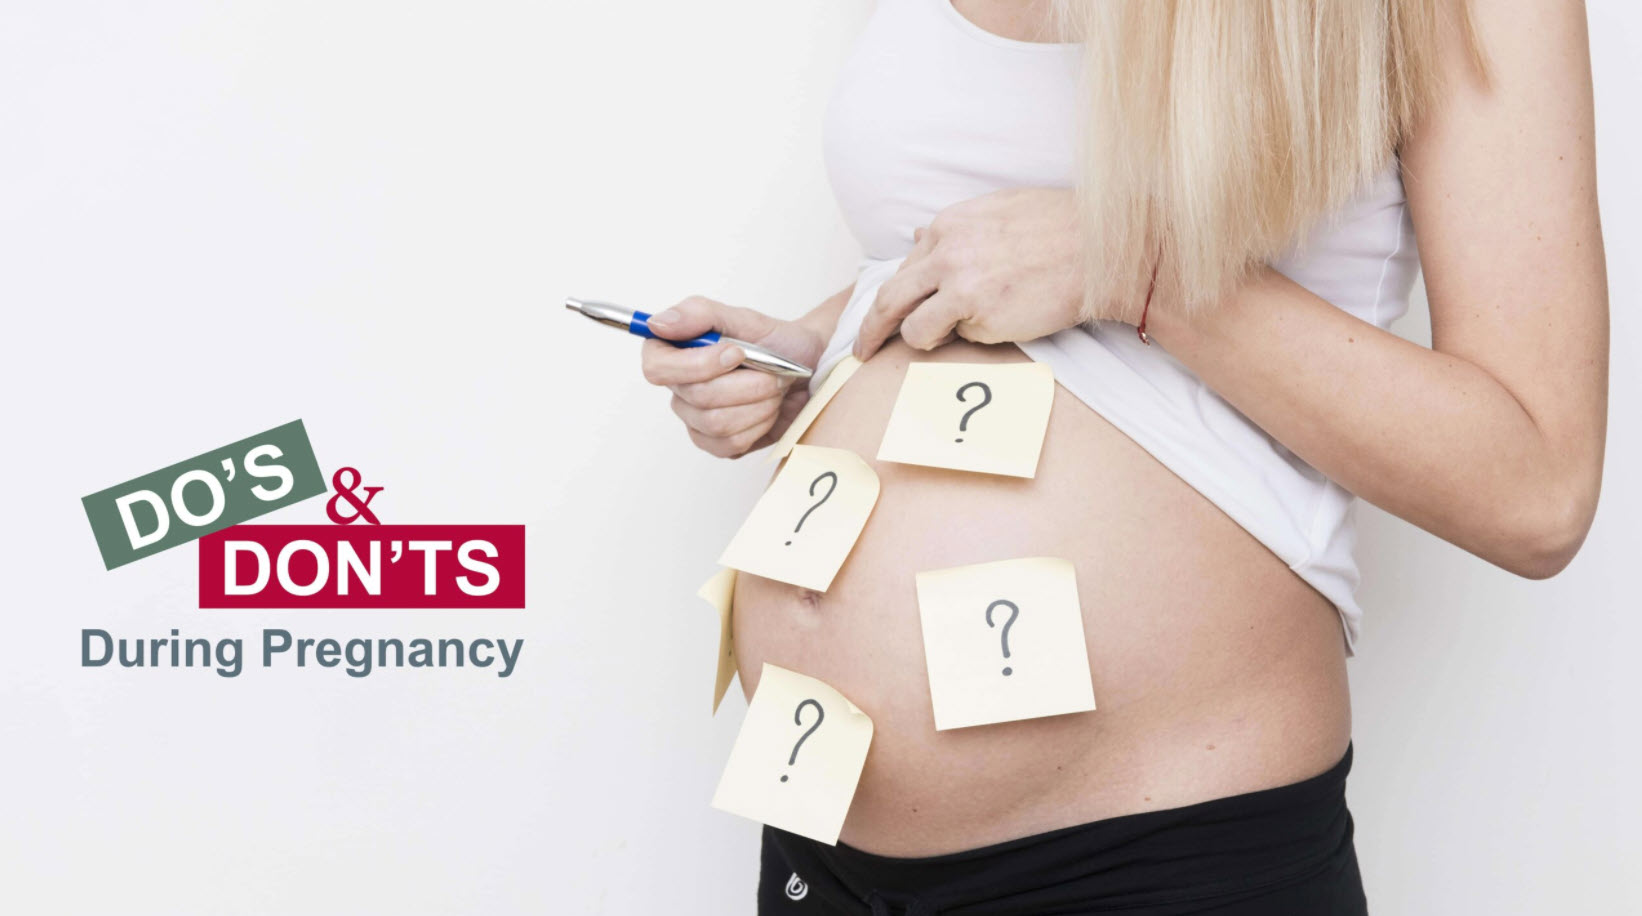 Do’s and Don’ts in the first trimester of pregnancy